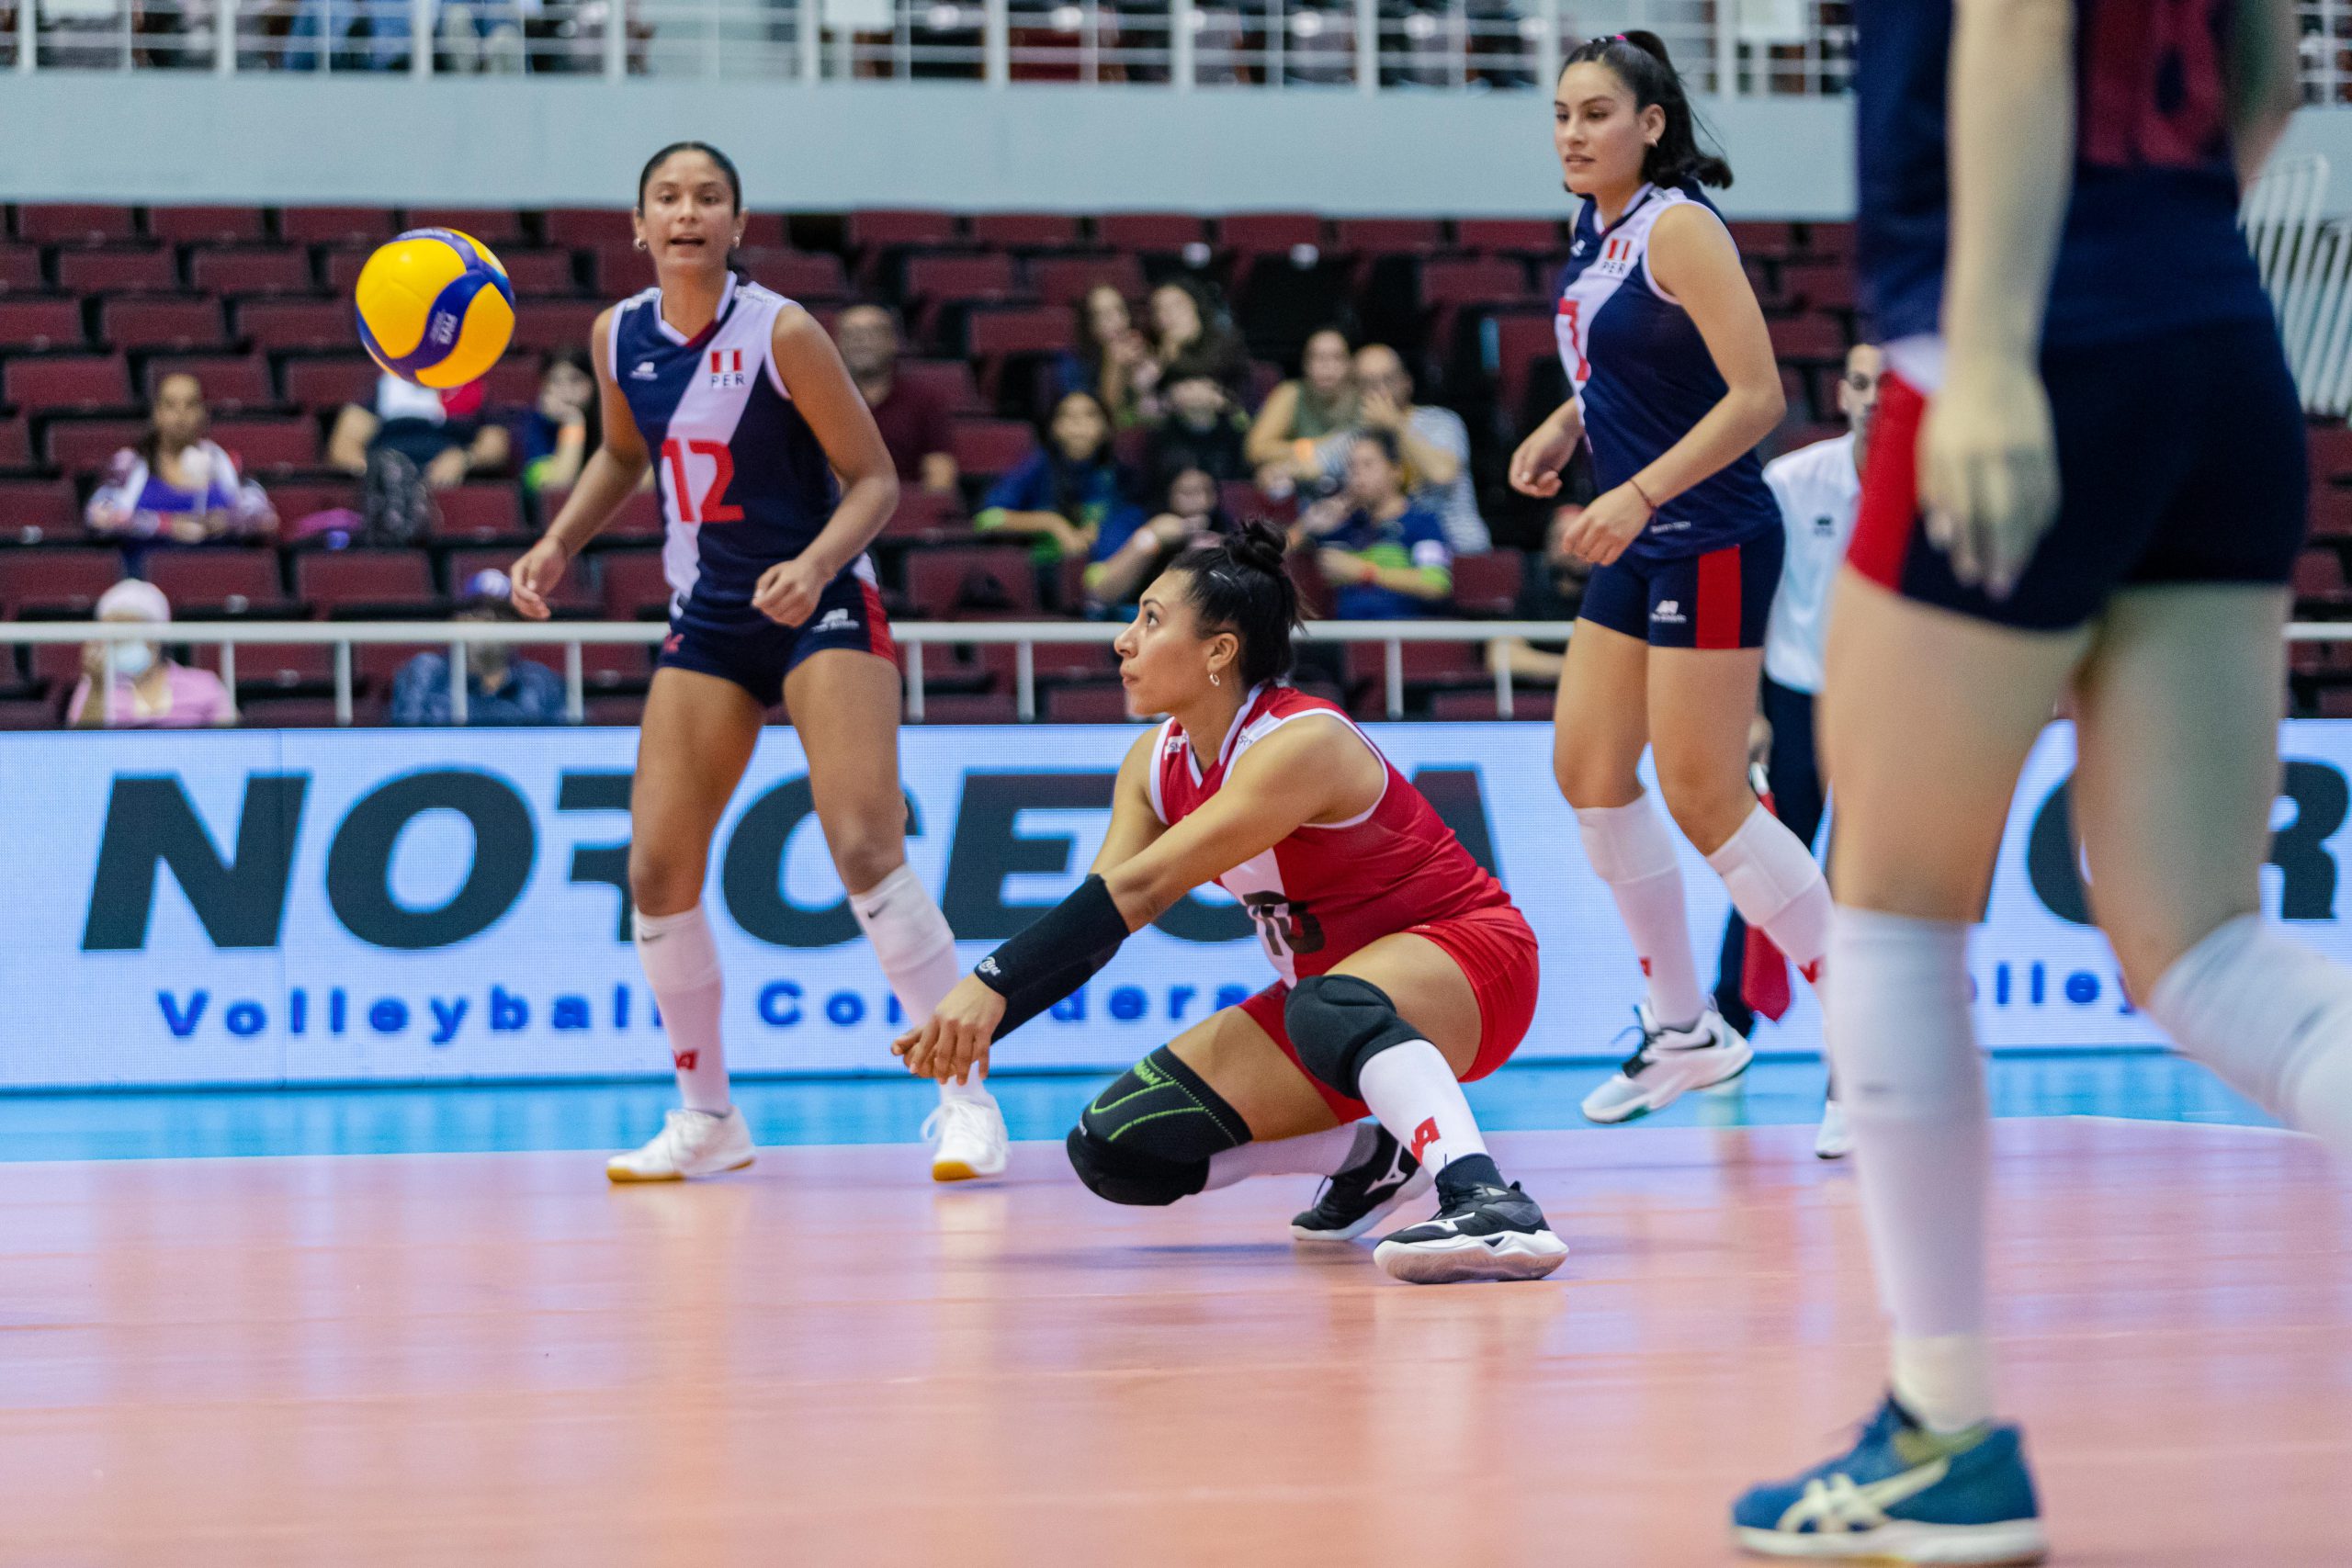 Peru defeated Chile and will play for the classification of positions from 5 to 8 